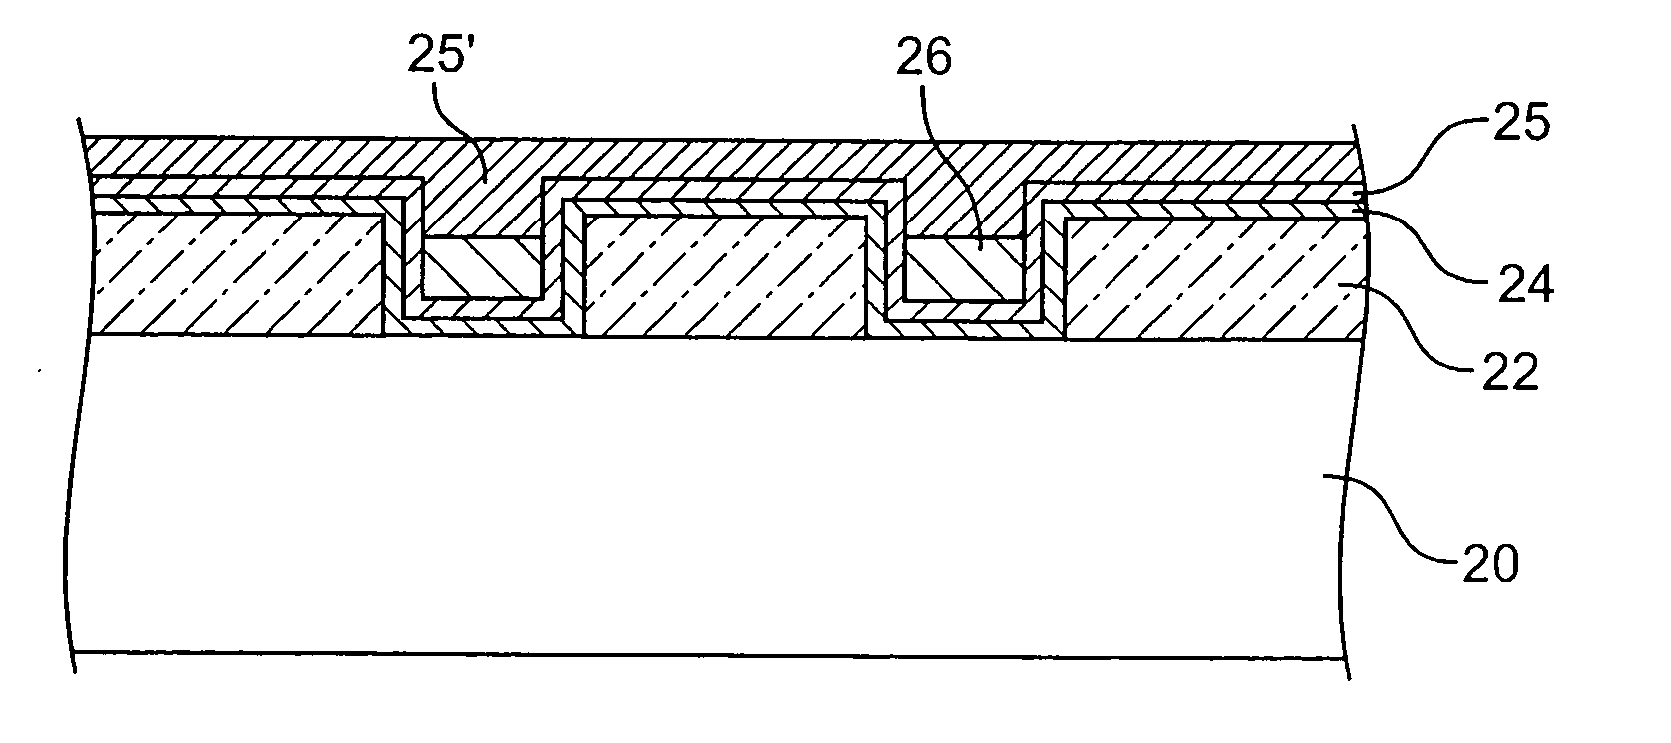 Electroplated CoWP composite structures as copper barrier layers